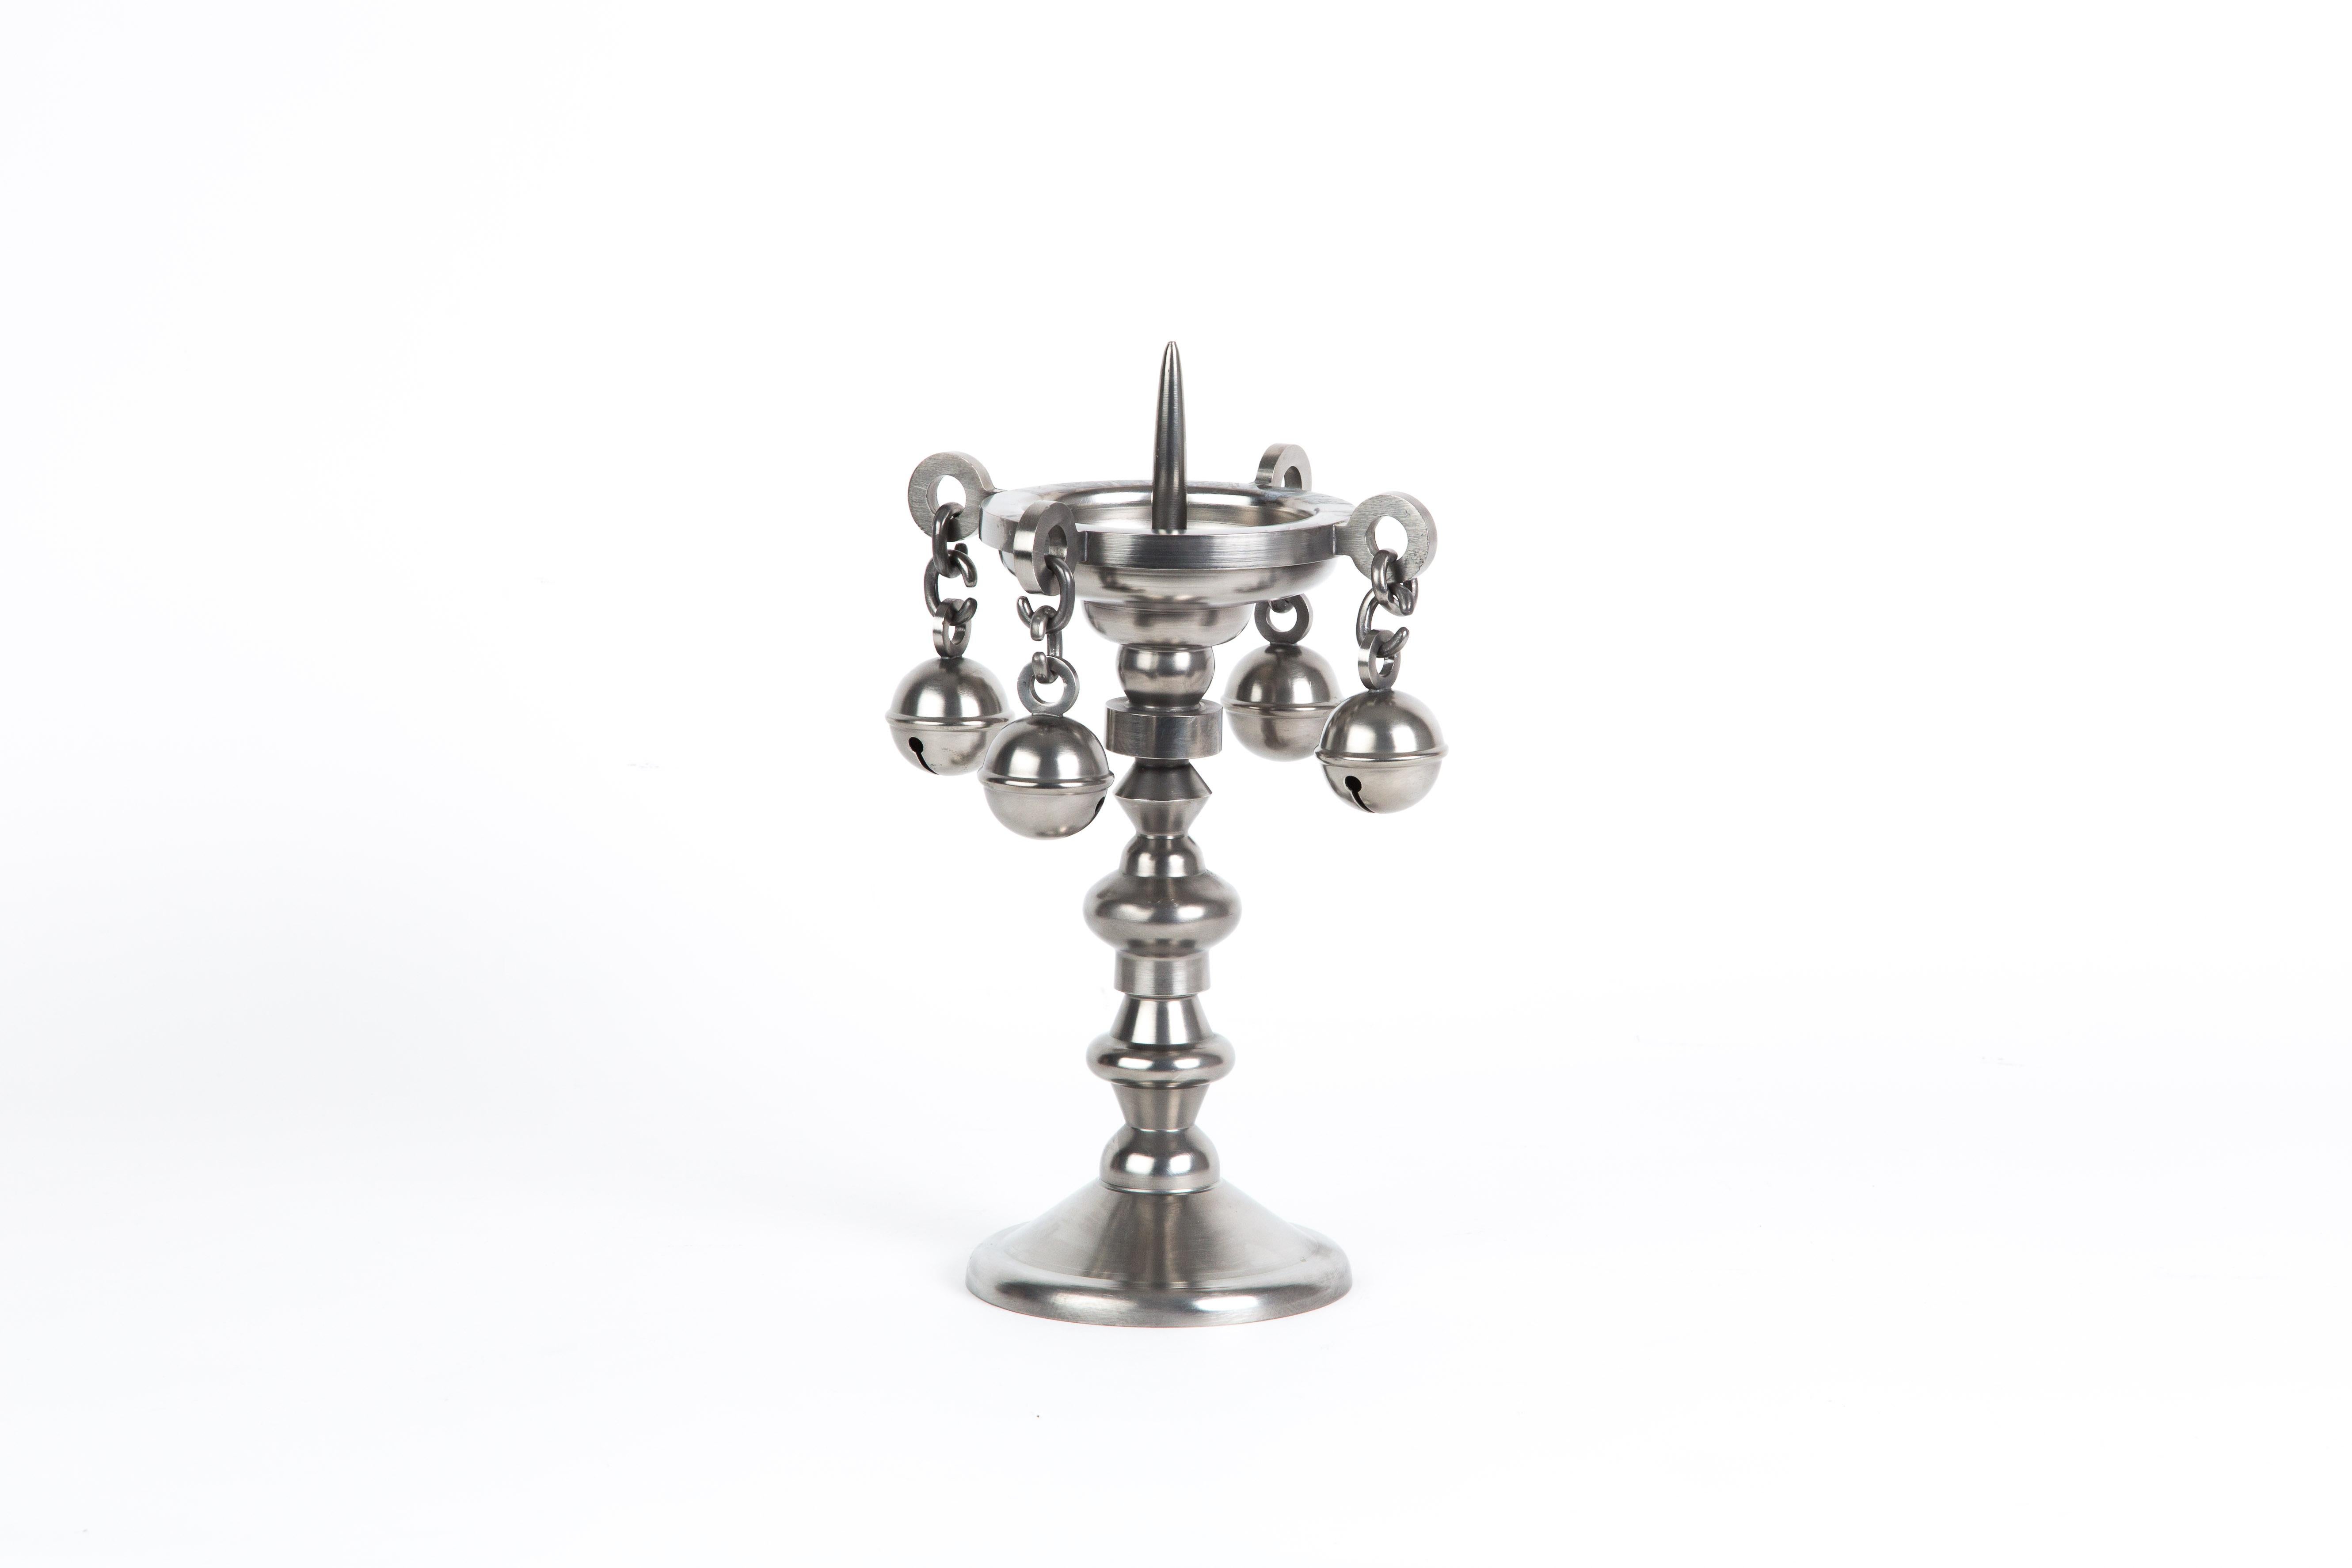 Pewter Candle Holder - Art by Studio Job (Job Smeets & Nynke Tynagel)